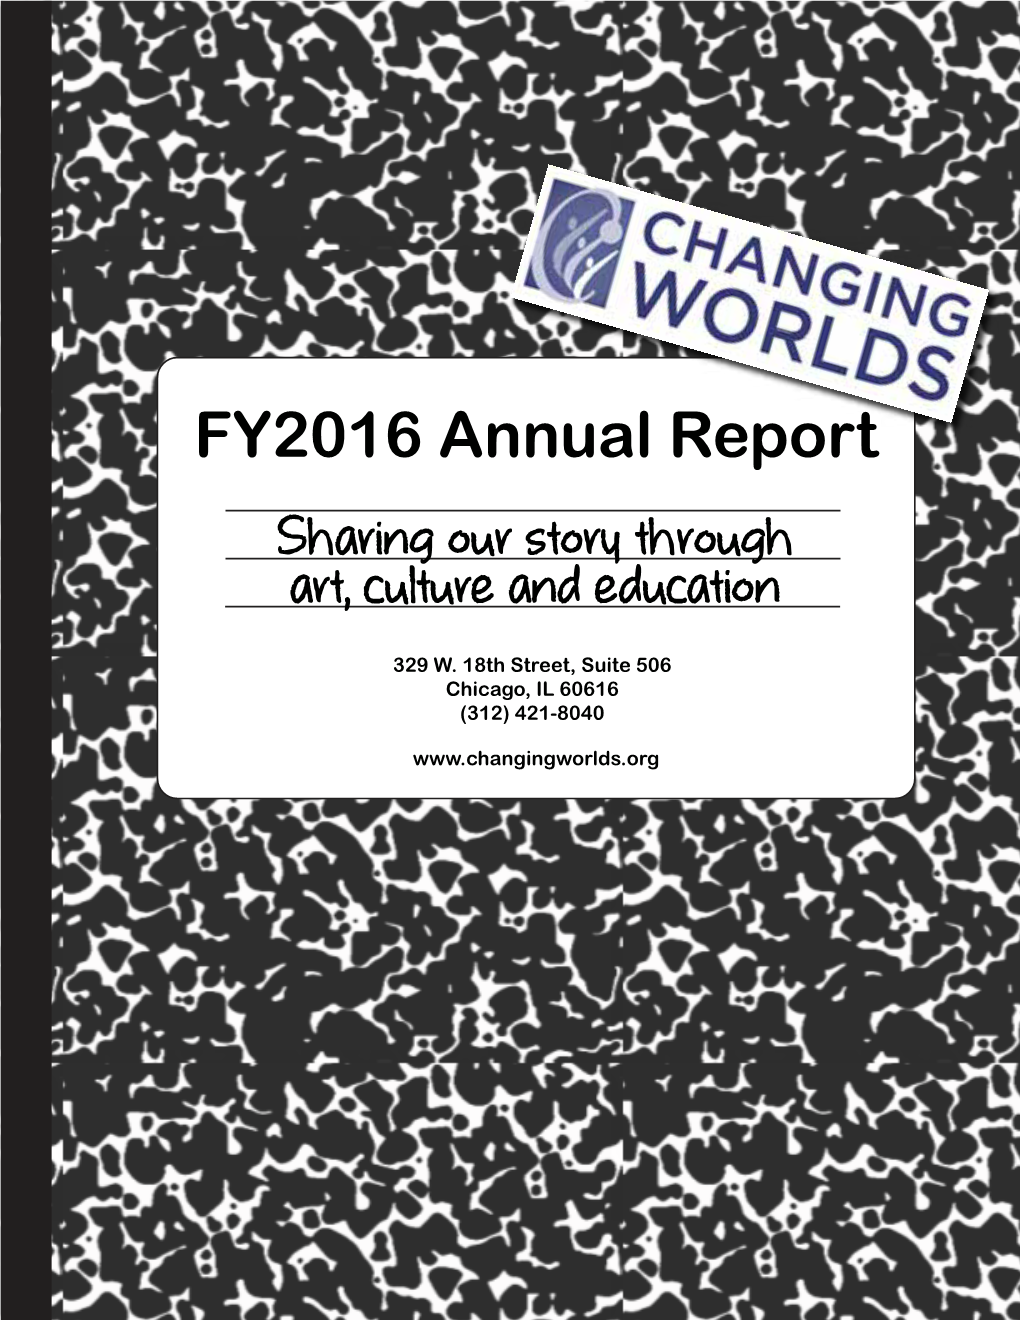 FY2016 Annual Report Sharing Our Story Through Art, Culture and Education